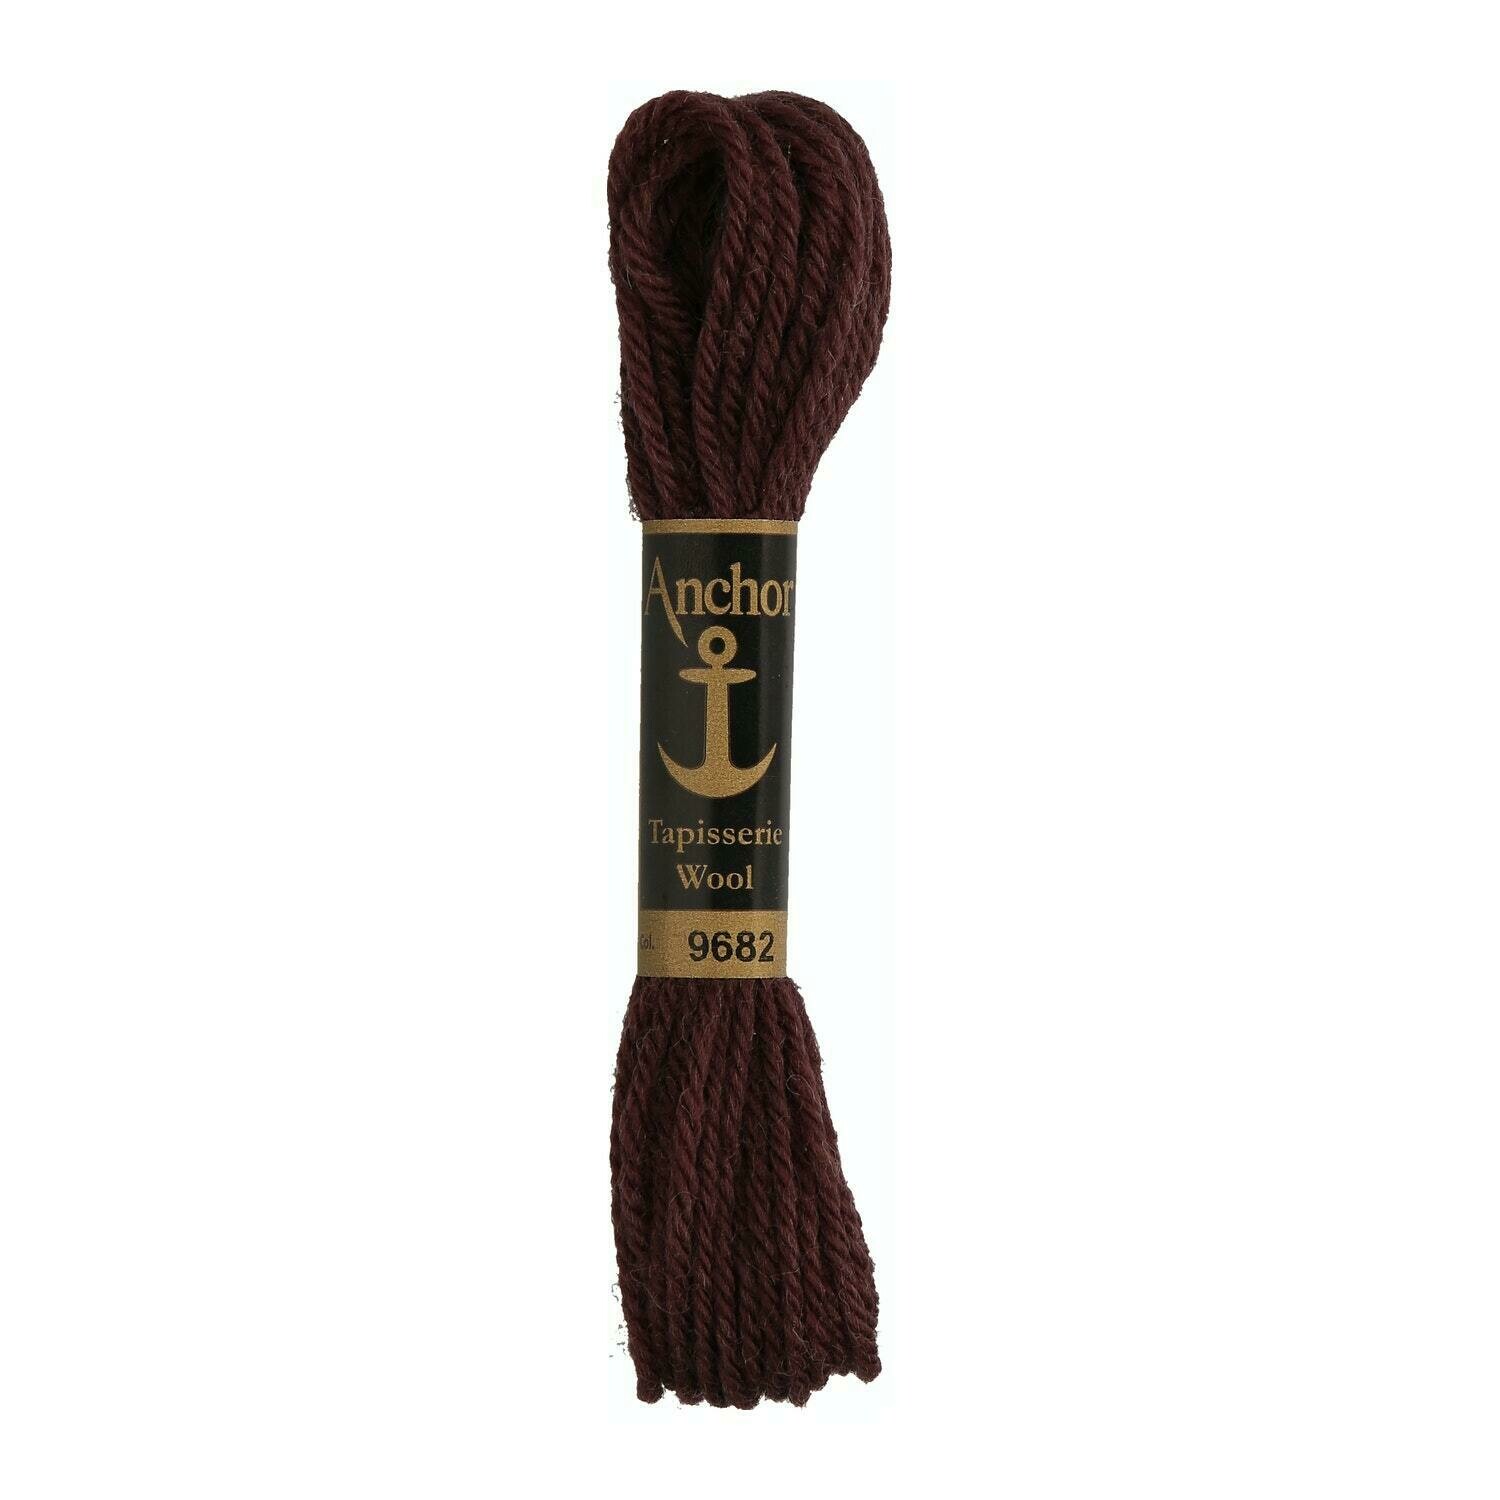 Anchor Tapisserie Wool #09682